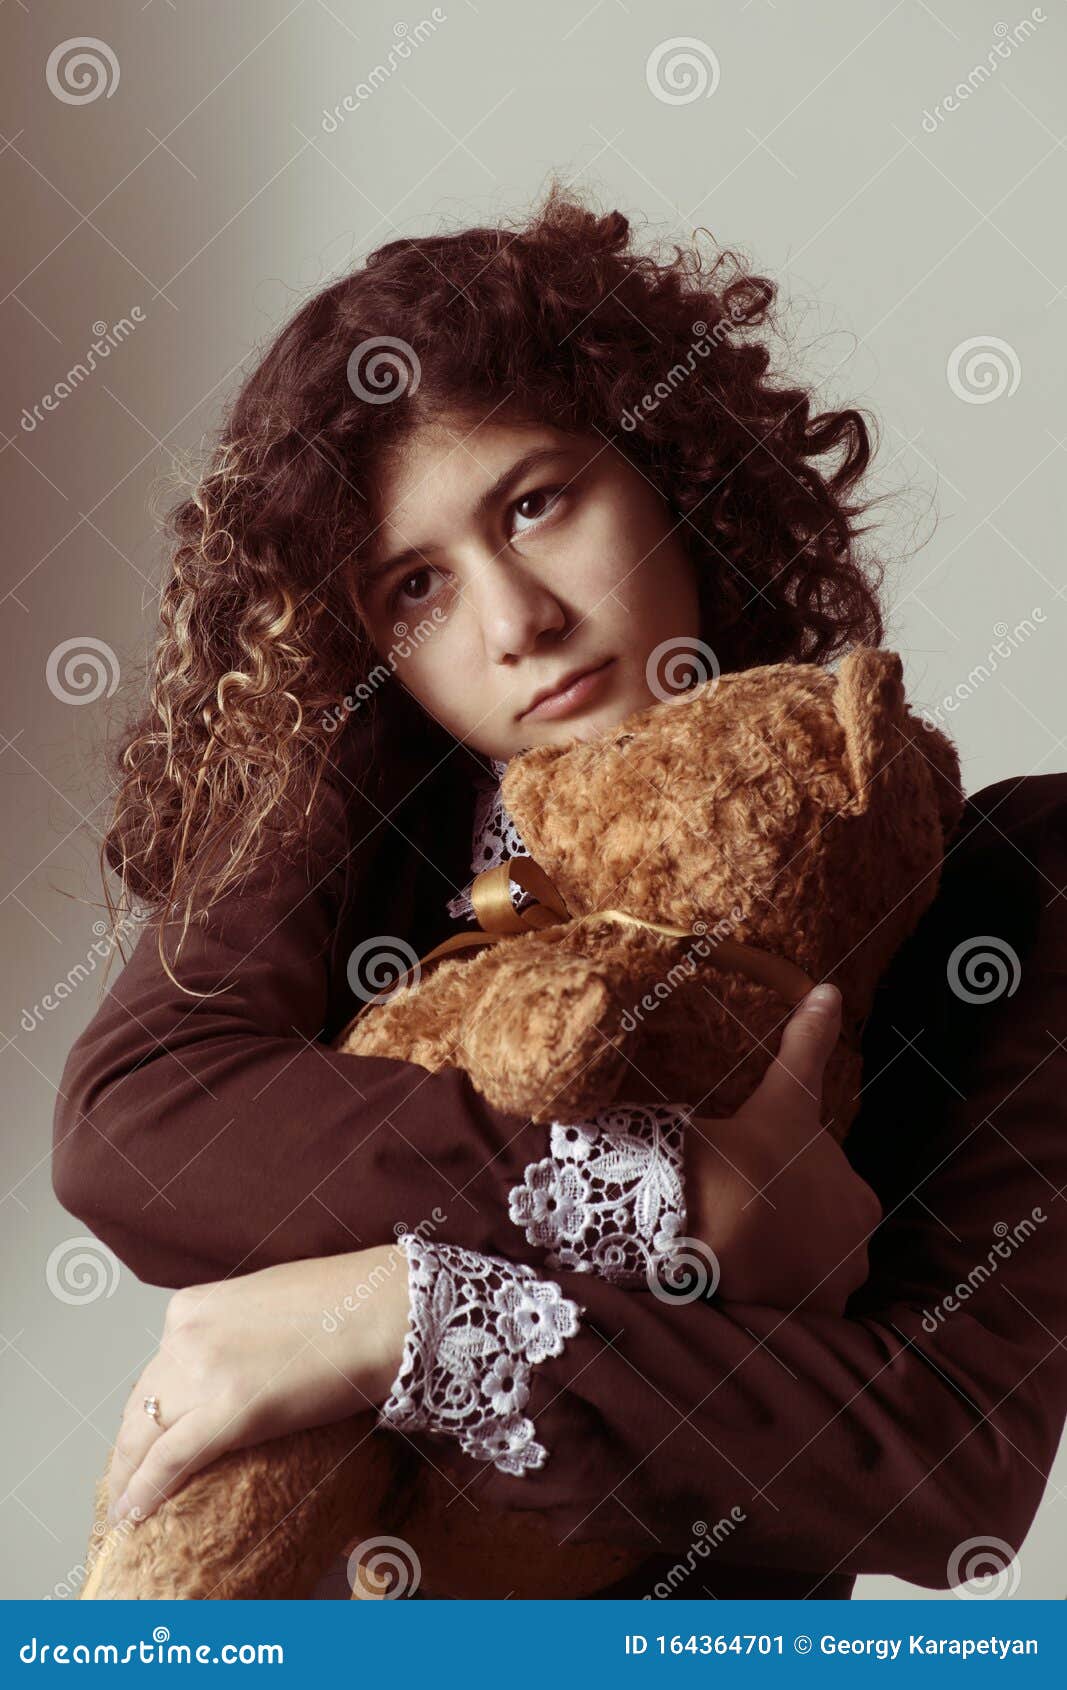 Teenager Girl with Curly Hair in a School Uniform in Retro Style with an  Old Teddy Bear in Her Arms, with a Pensive Face Stock Image - Image of  beauty, brunette: 164364701